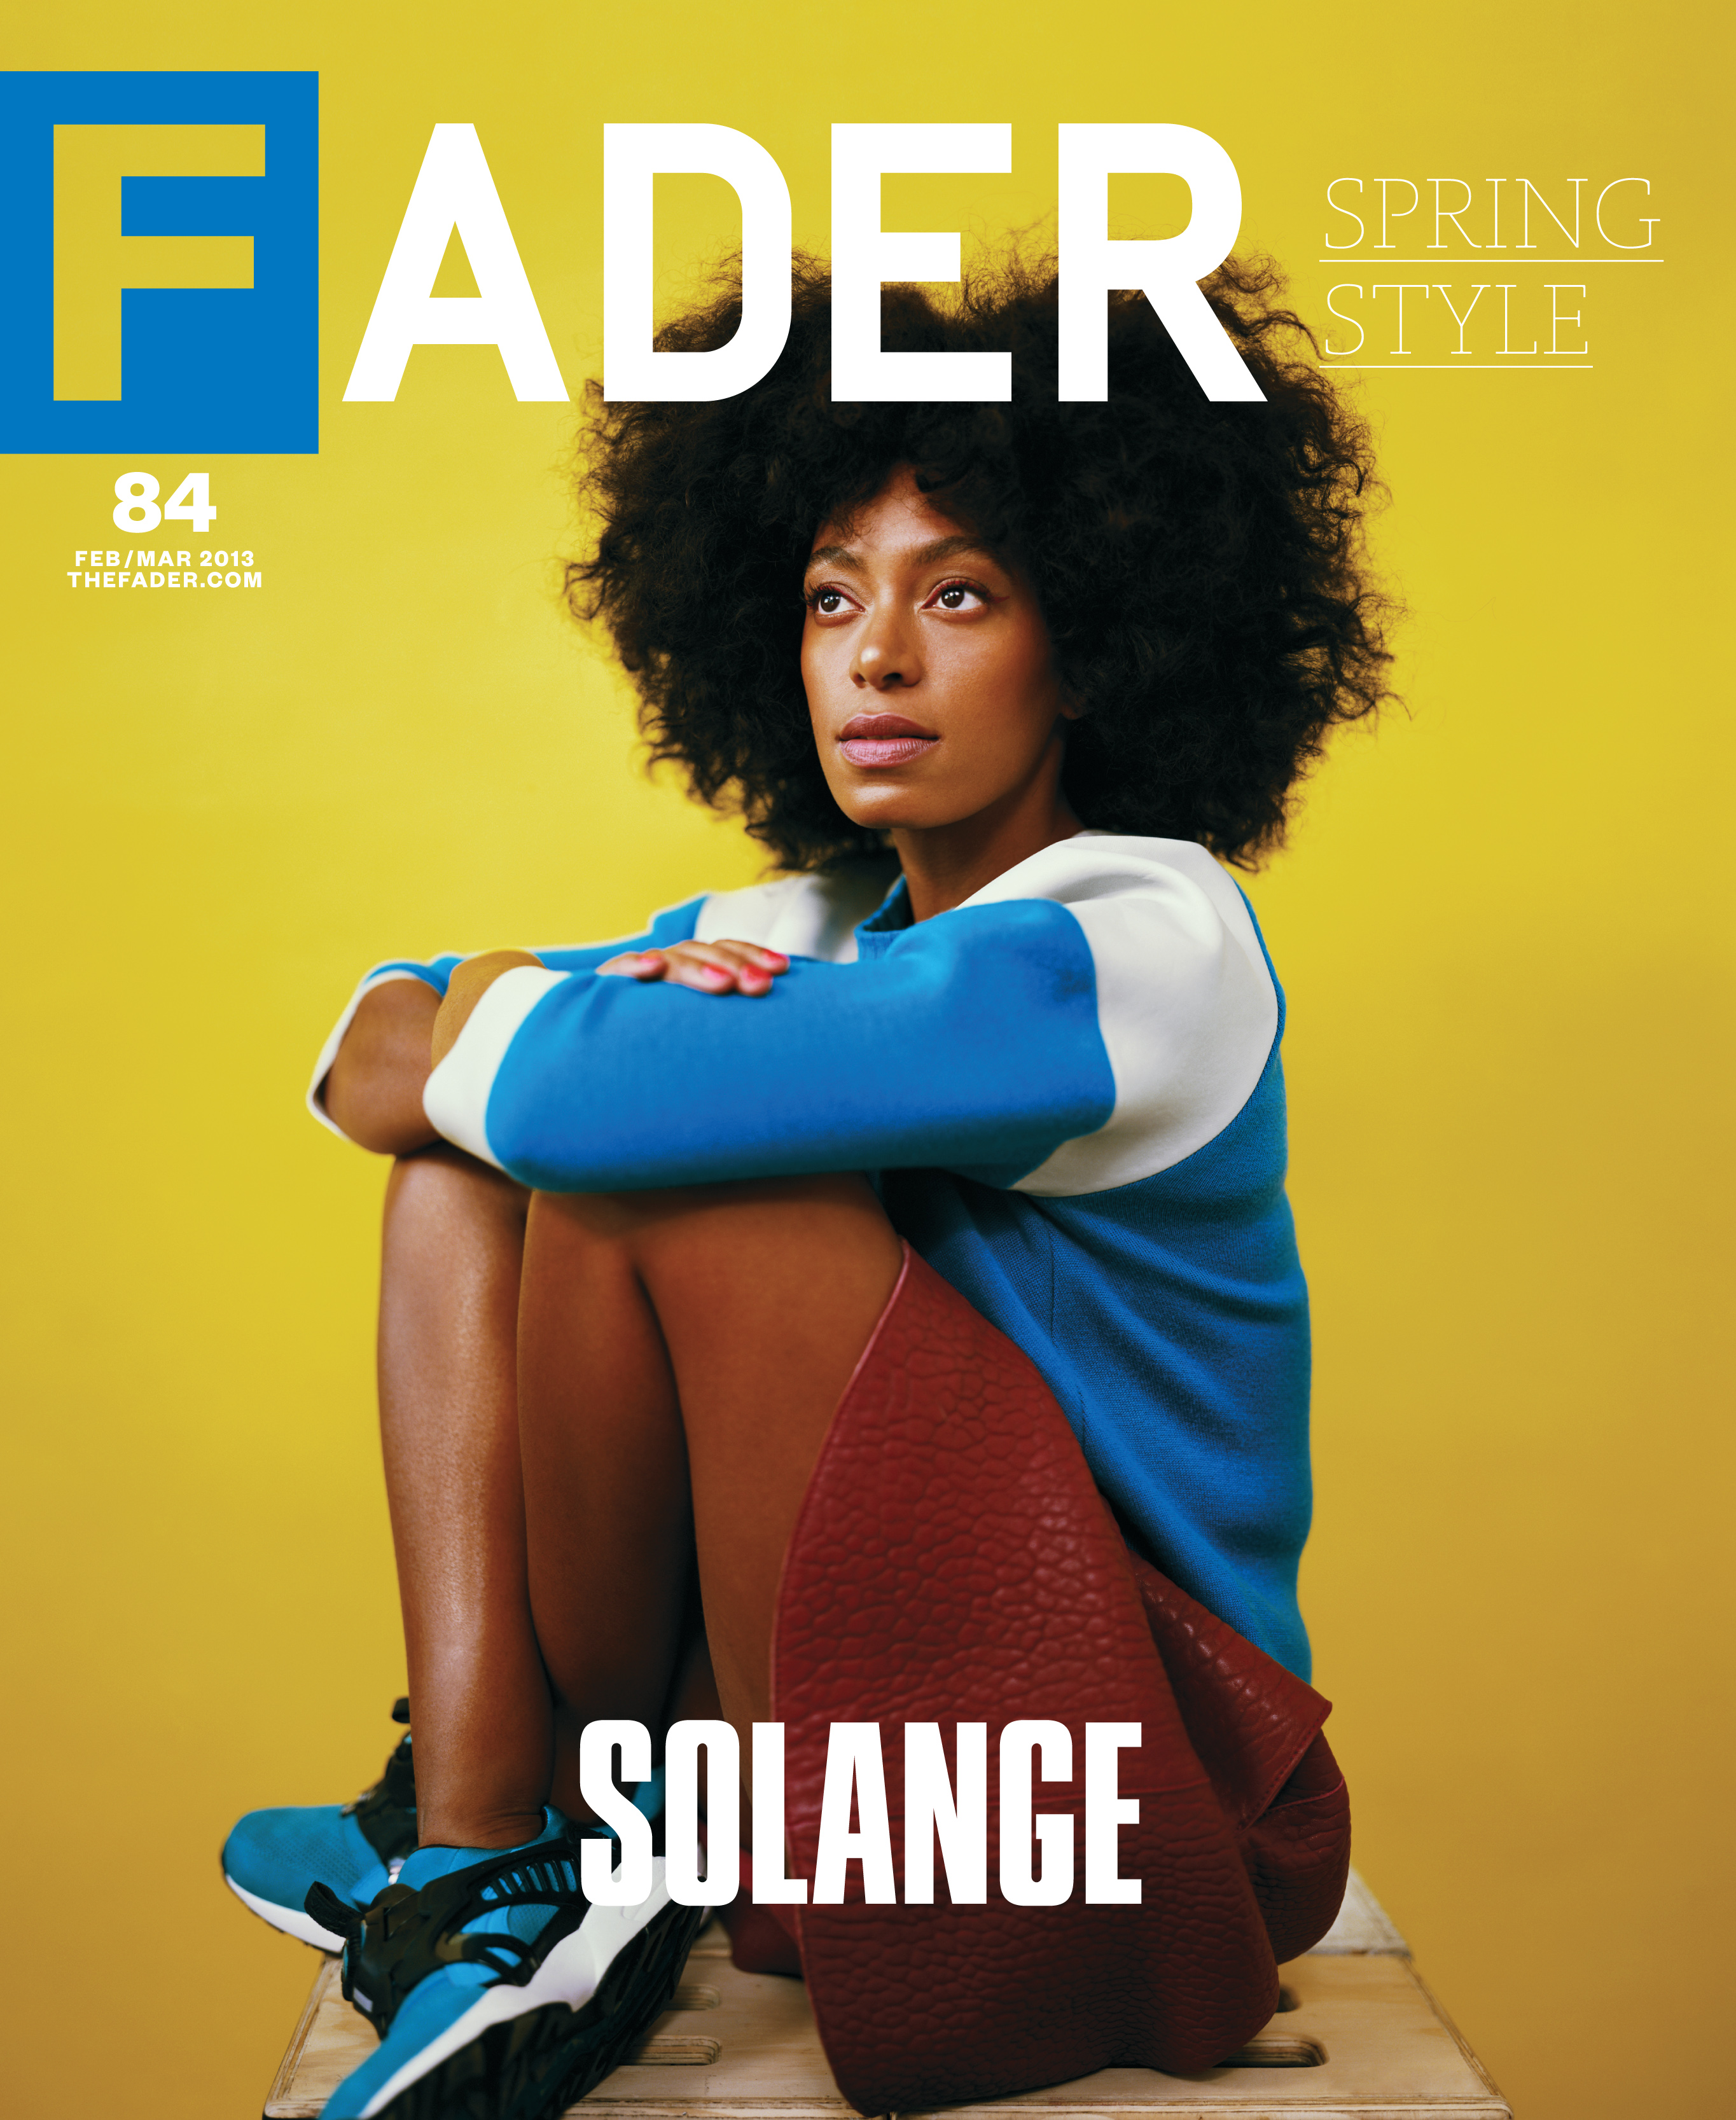 The Fader-February/March, "Solange"